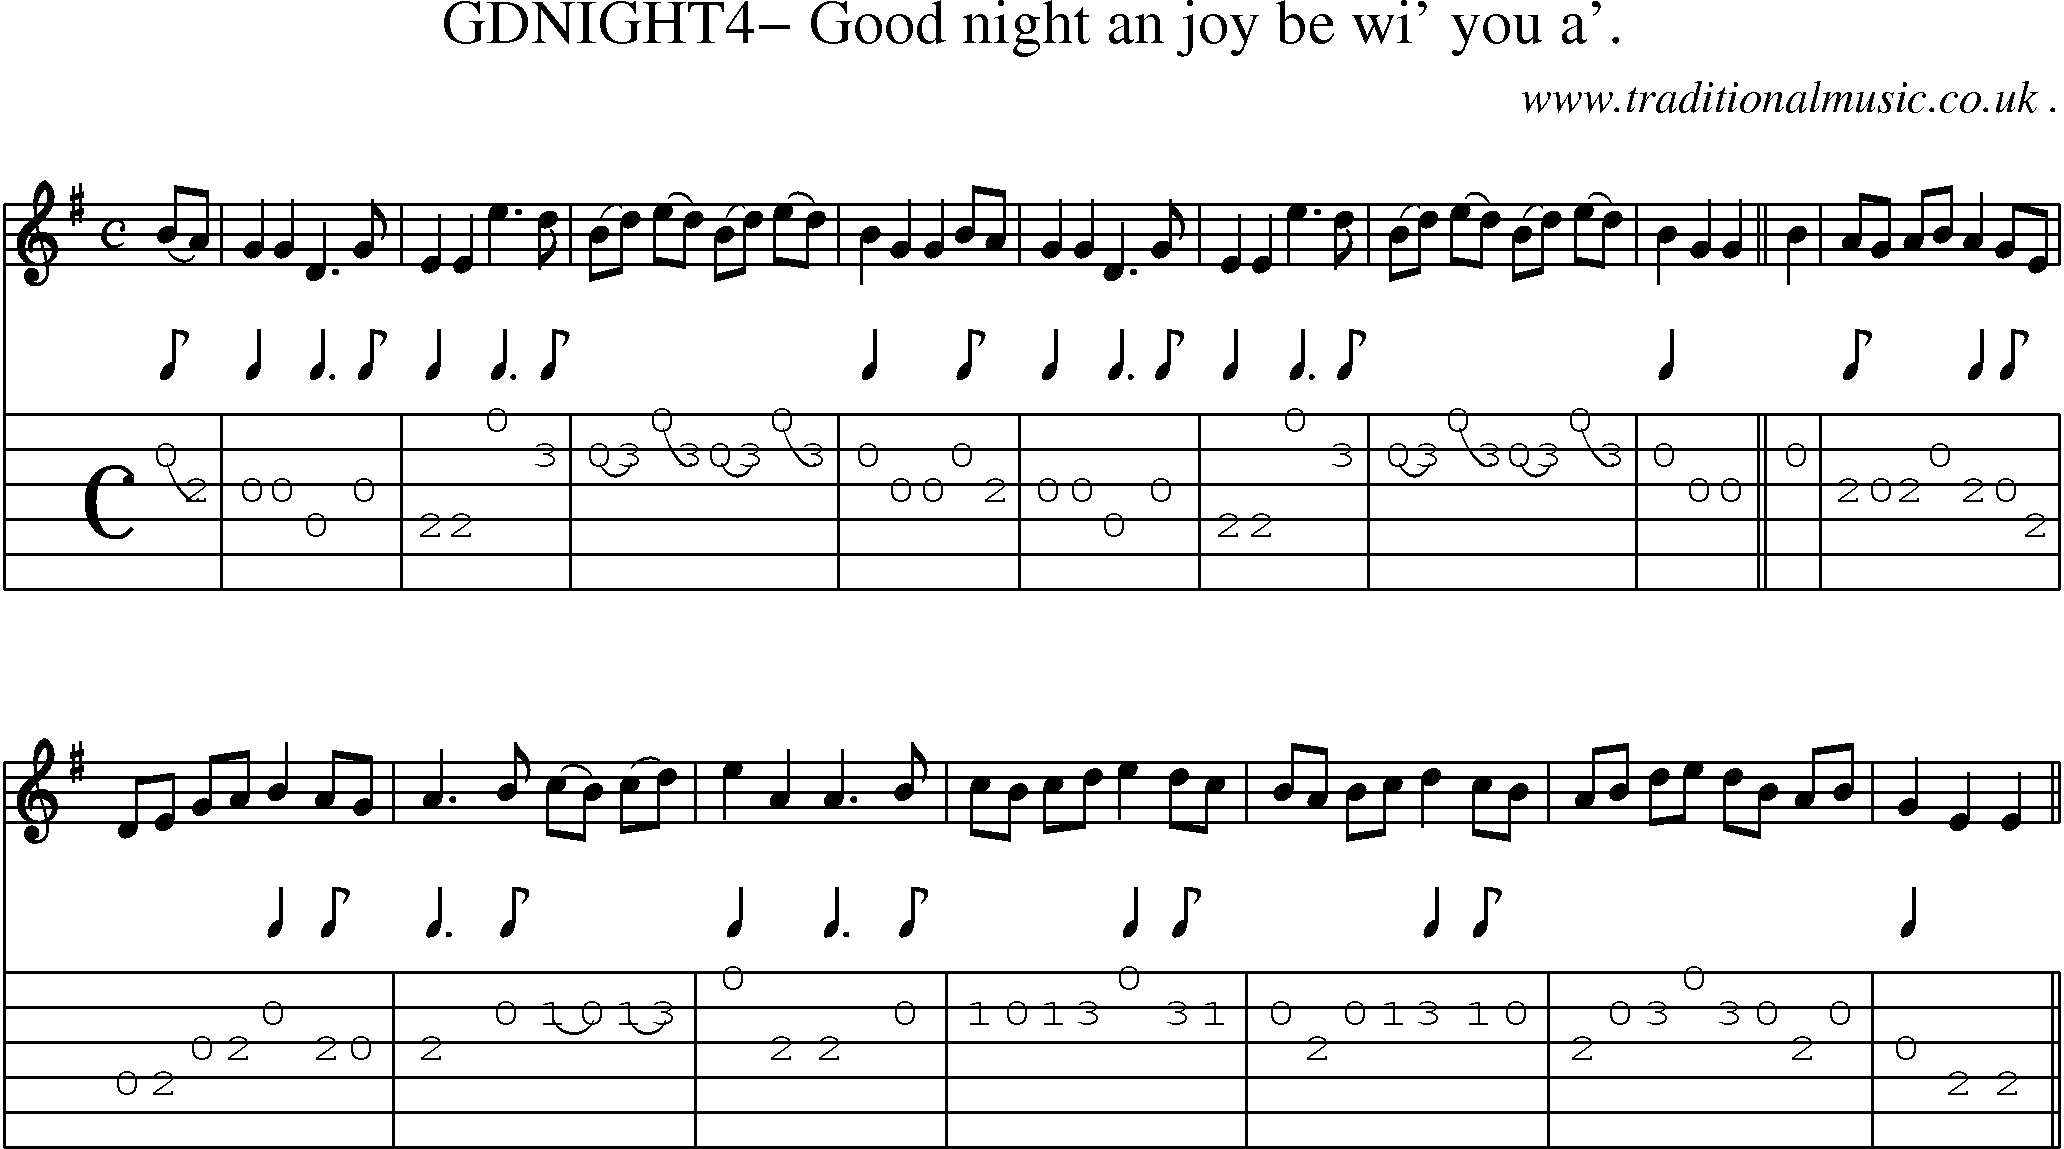 Sheet-Music and Guitar Tabs for Gdnight4 Good Night An Joy Be Wi You A